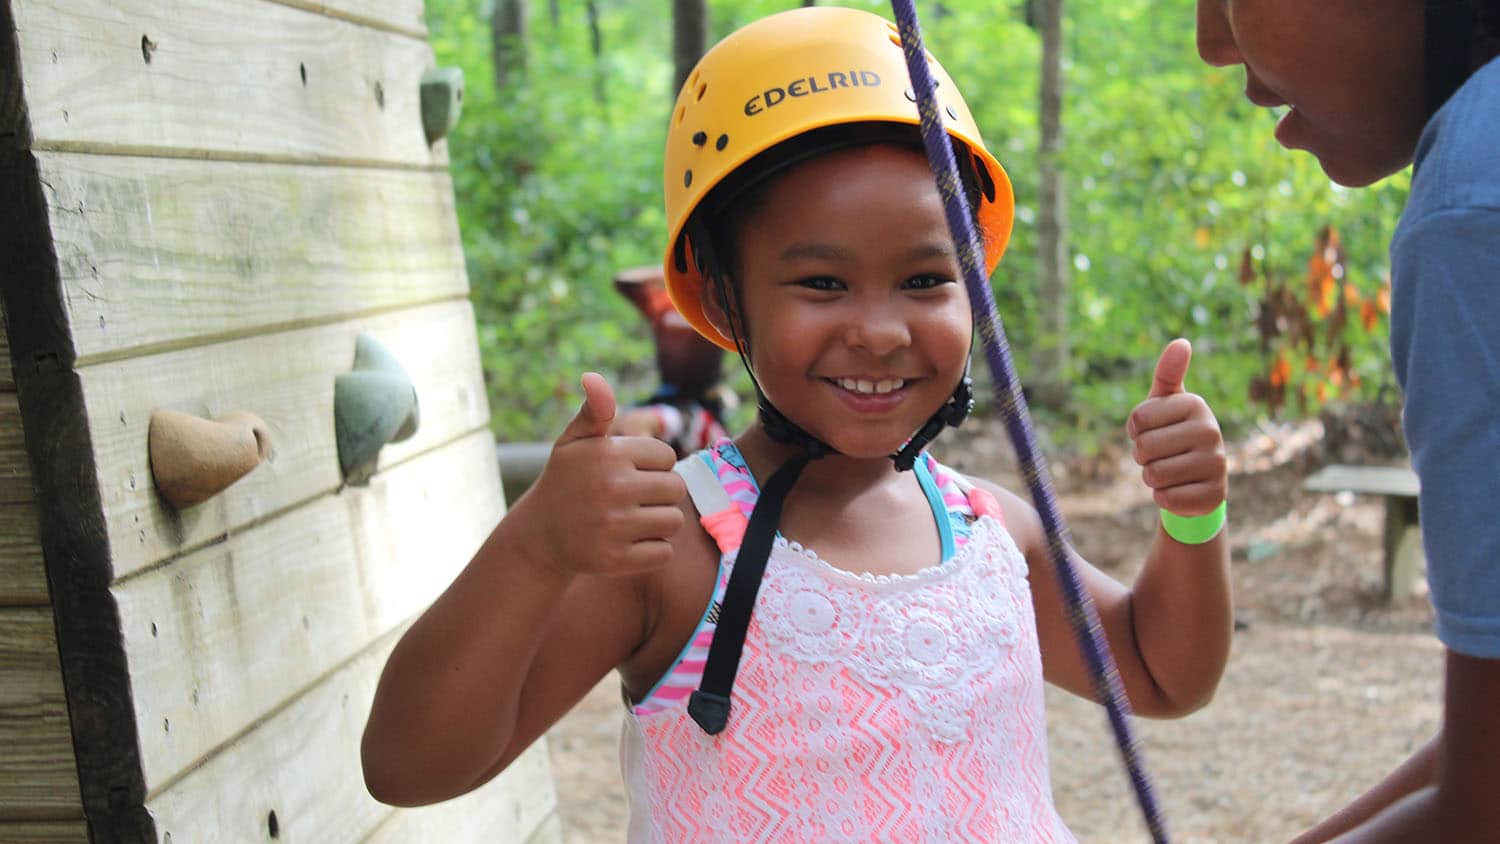 A young camper gives two thumbs up as she prepares to climb a climbing wall.